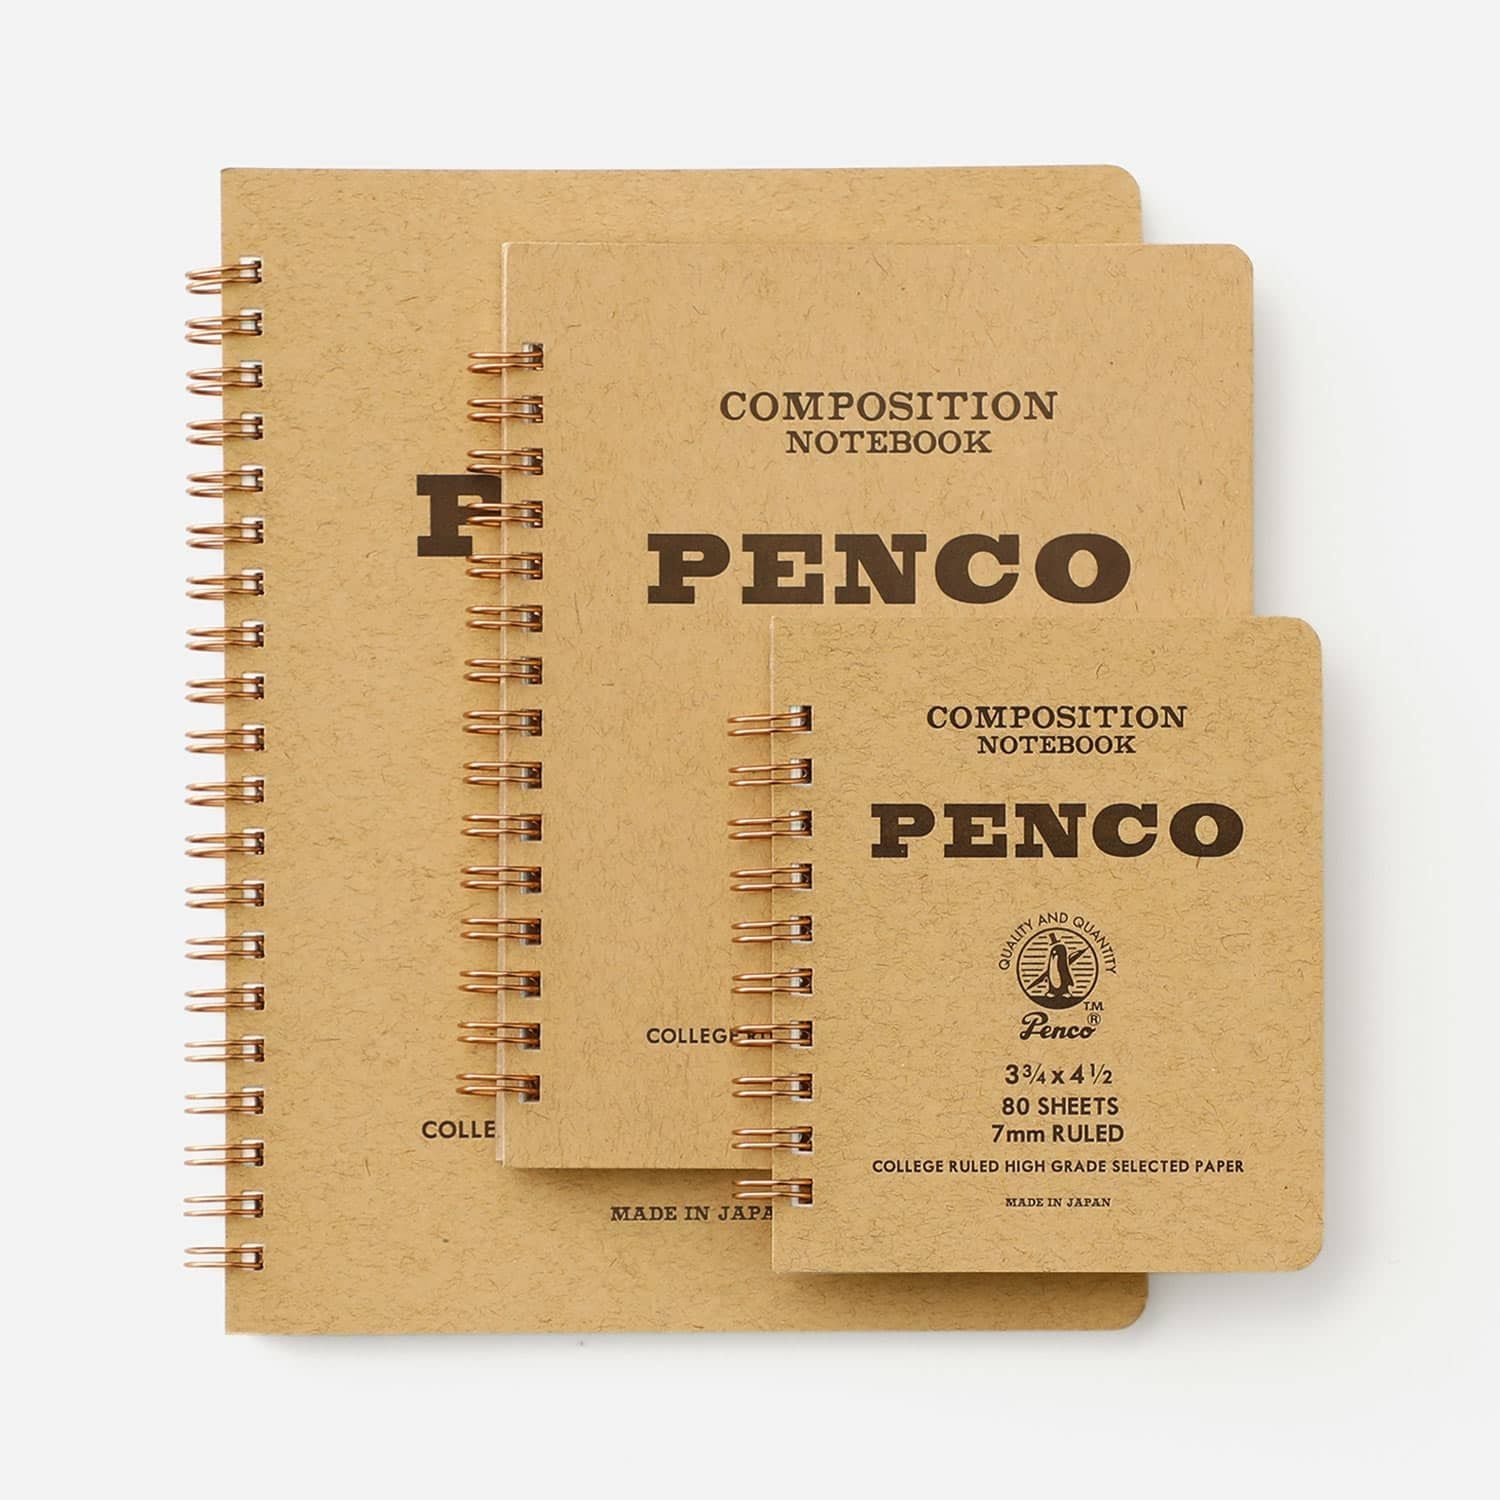 Hightide Penco Coil Notebook - 2 sizes